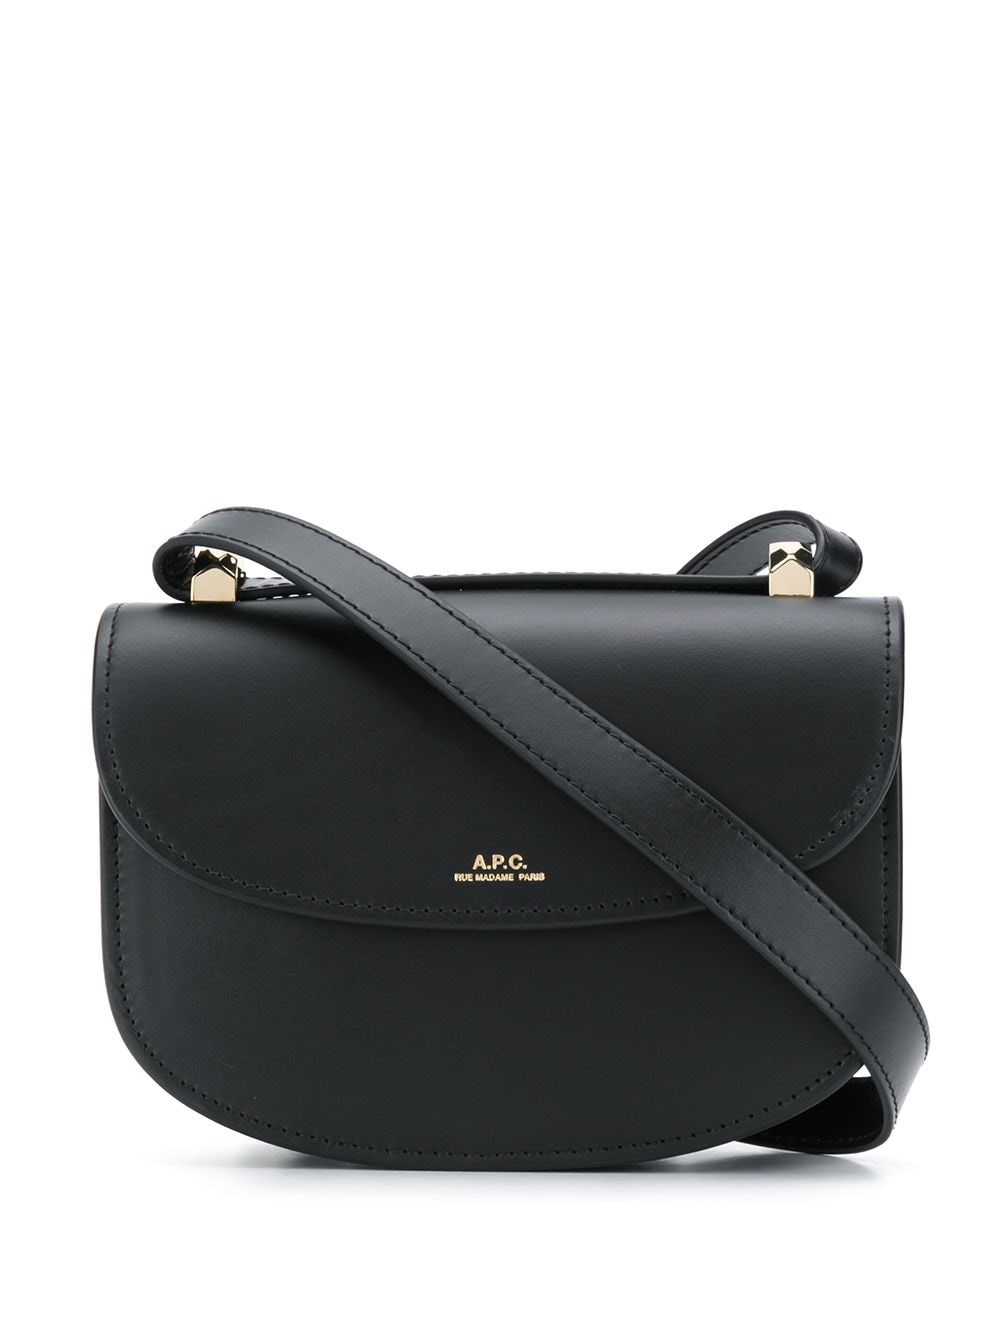 a.p.c. GENEVE バッグ available on montiboutique.com - 55012